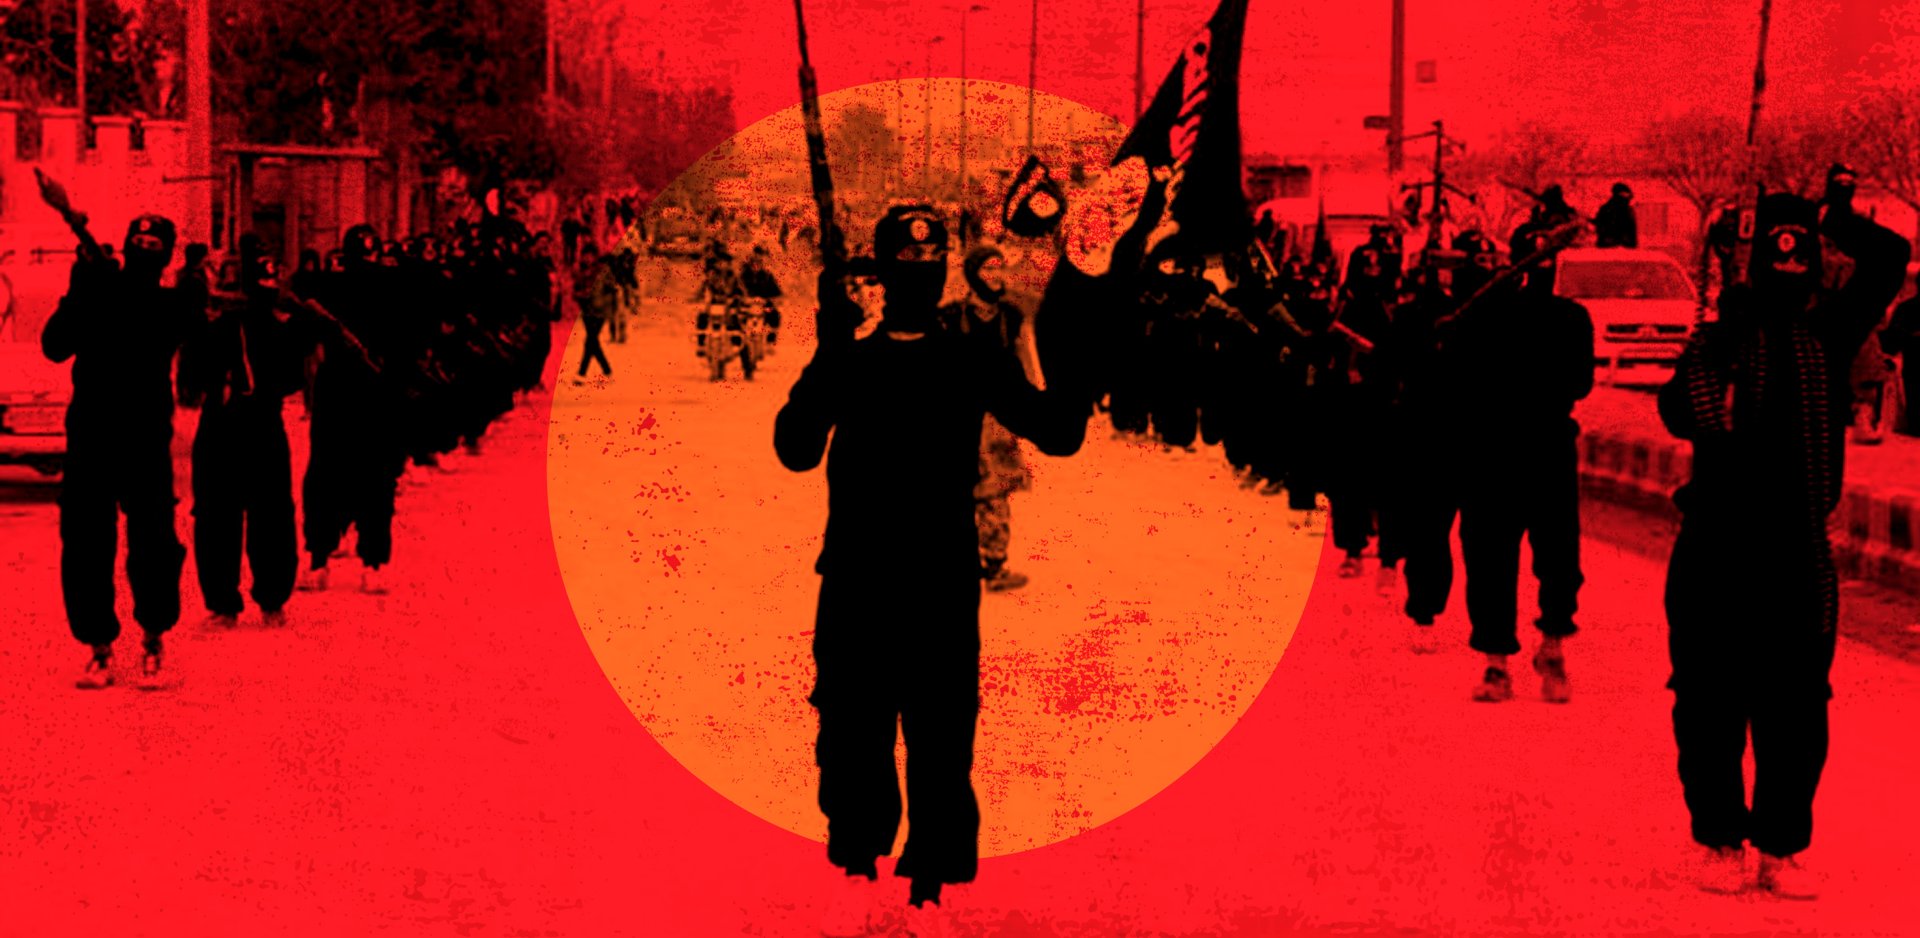 http://www.theatlantic.com/magazine/archive/2015/03/what-isis-really-wants/384980/?utm_source=SFFB